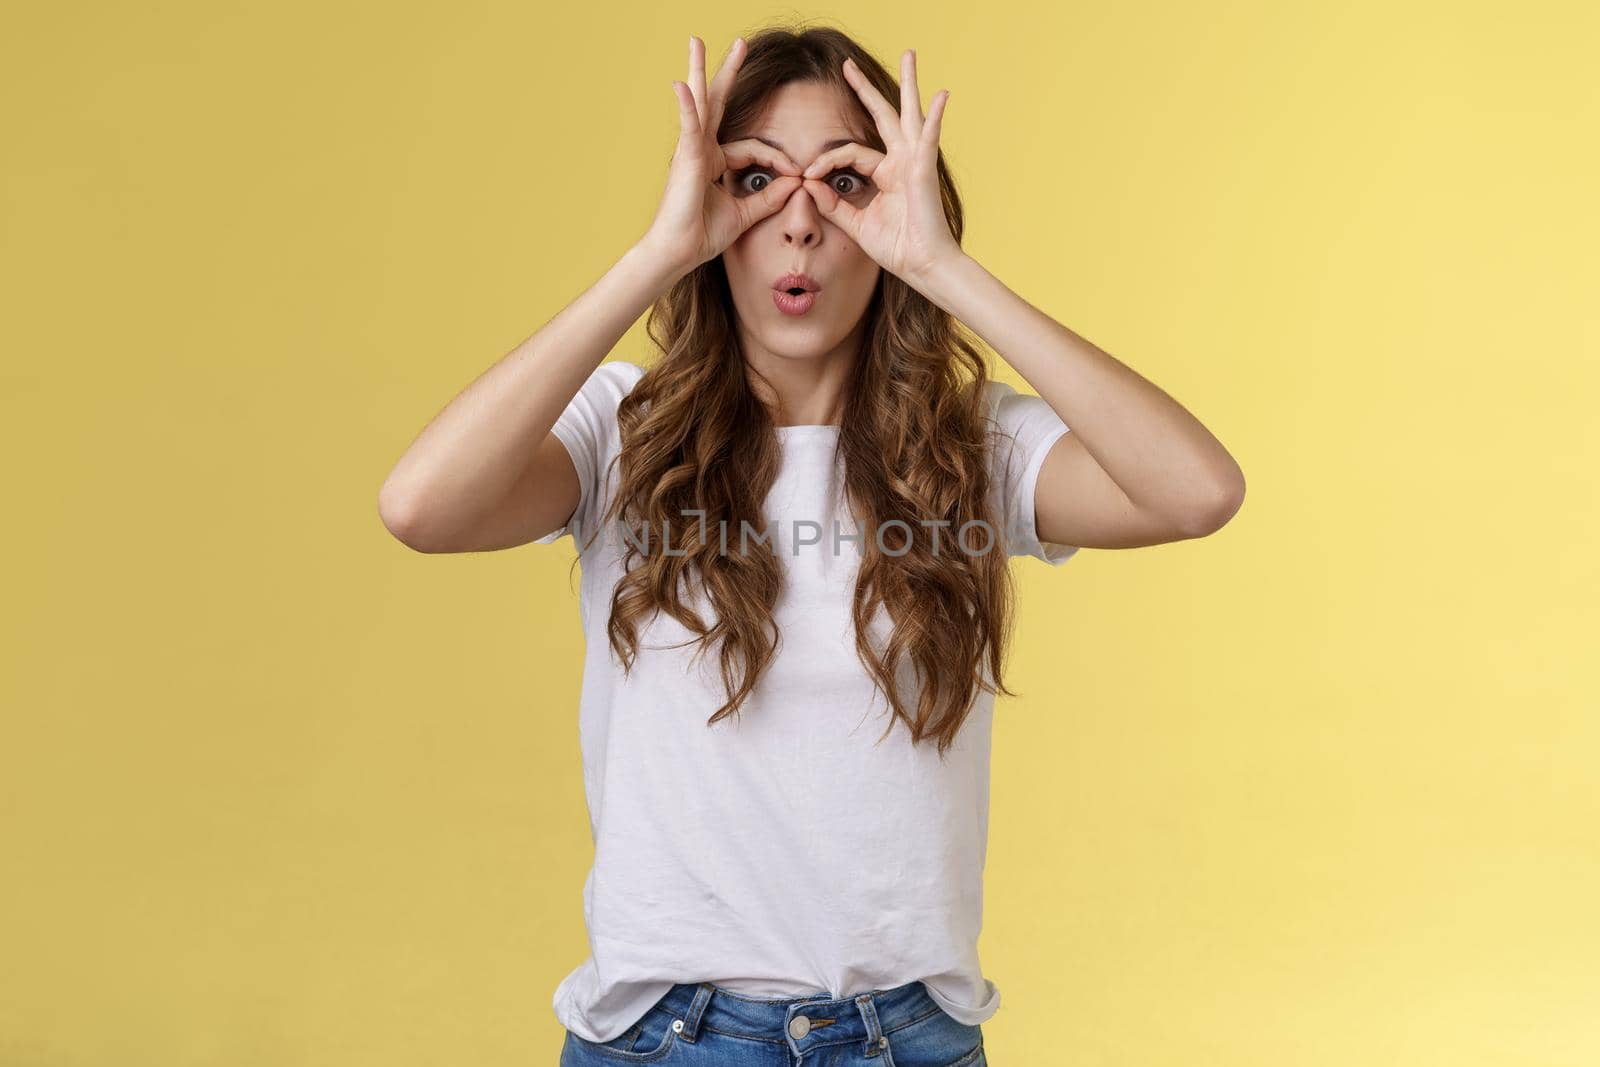 Wow so cool. Girl obersve interesting awesome event show okay perfection gesture look through ring hands folding lips amused wondered glance camera fascinated admiration interested yellow background.